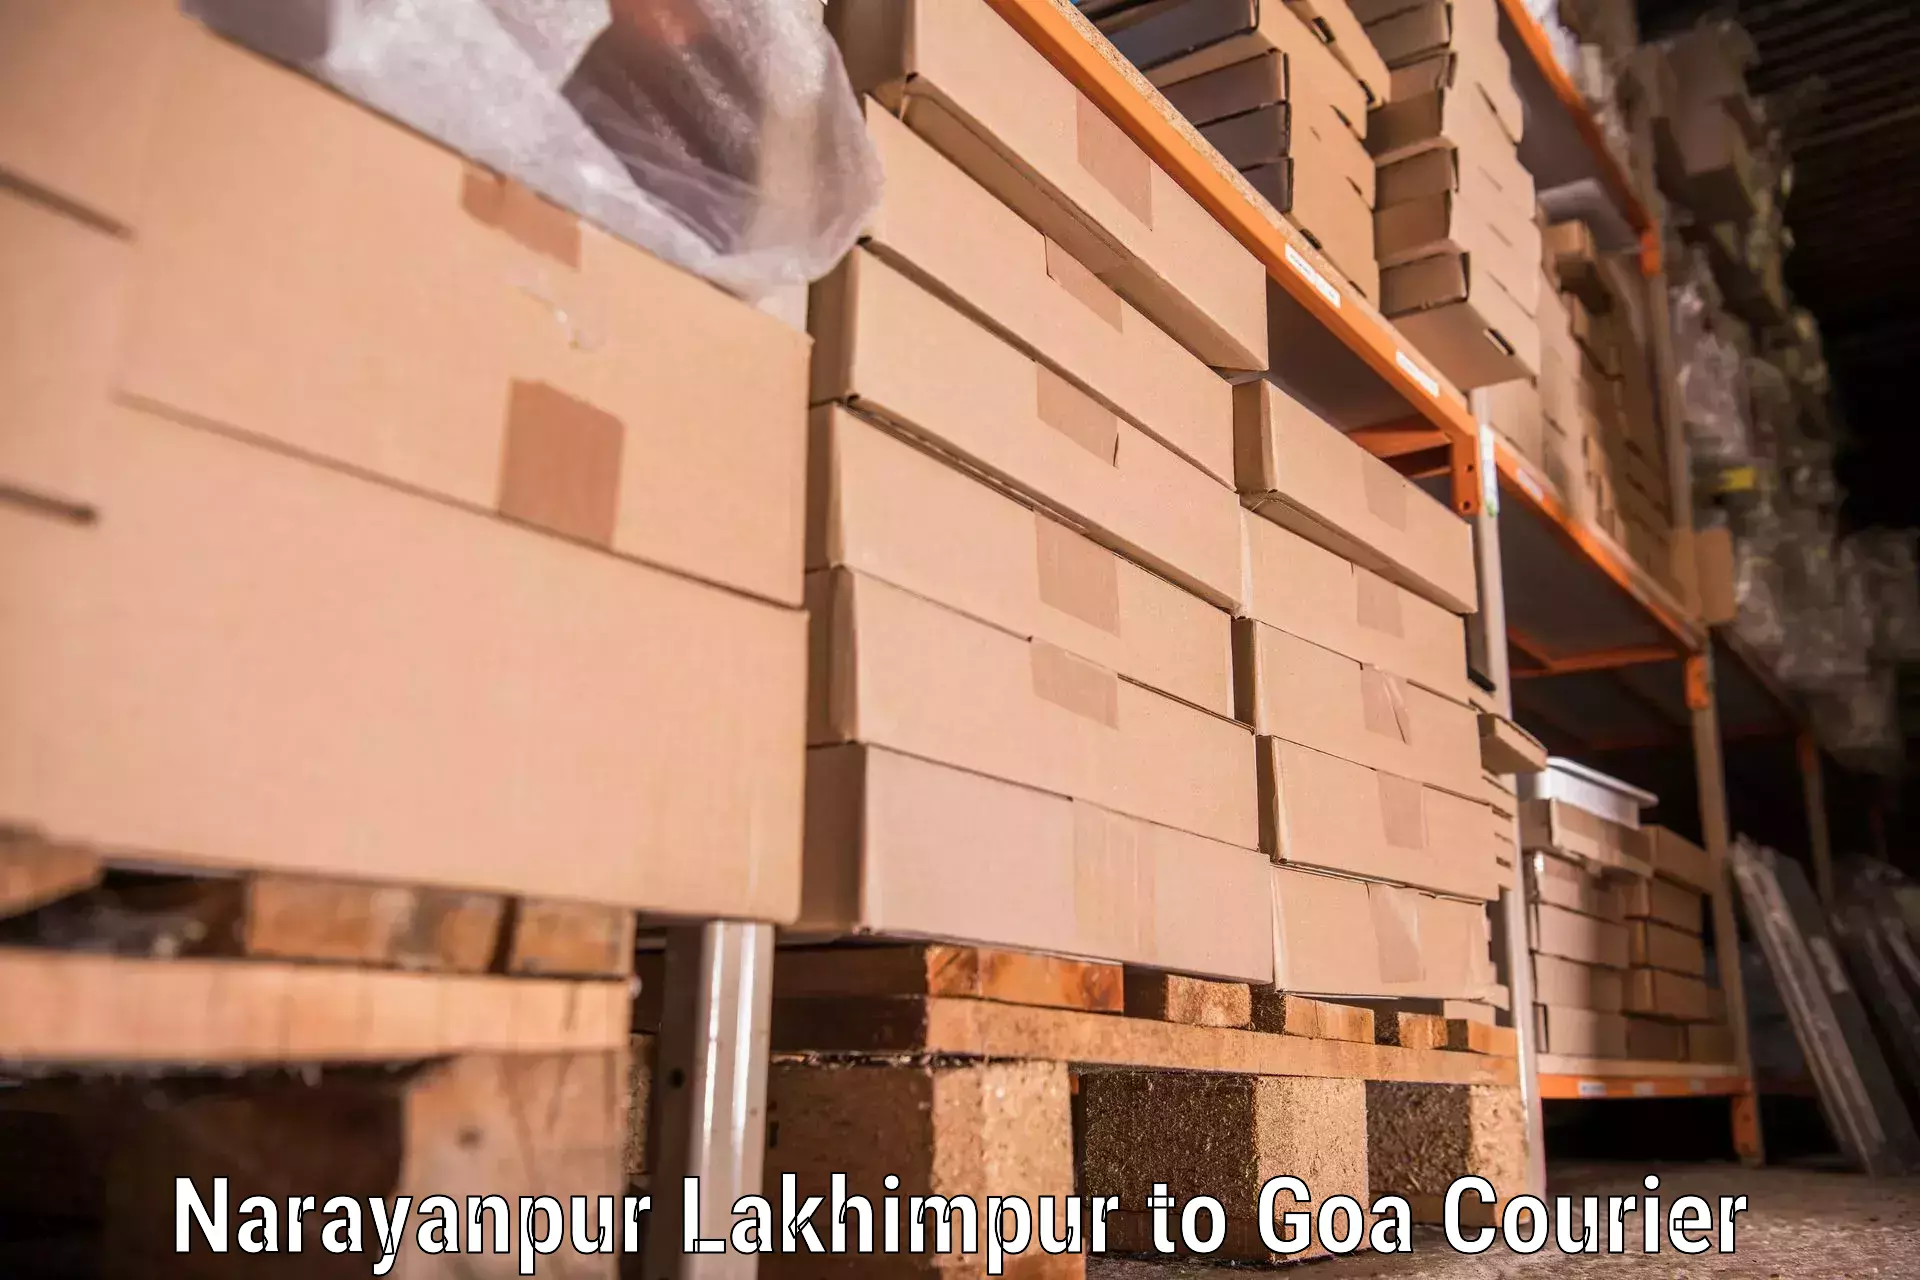 Trusted relocation experts Narayanpur Lakhimpur to IIT Goa